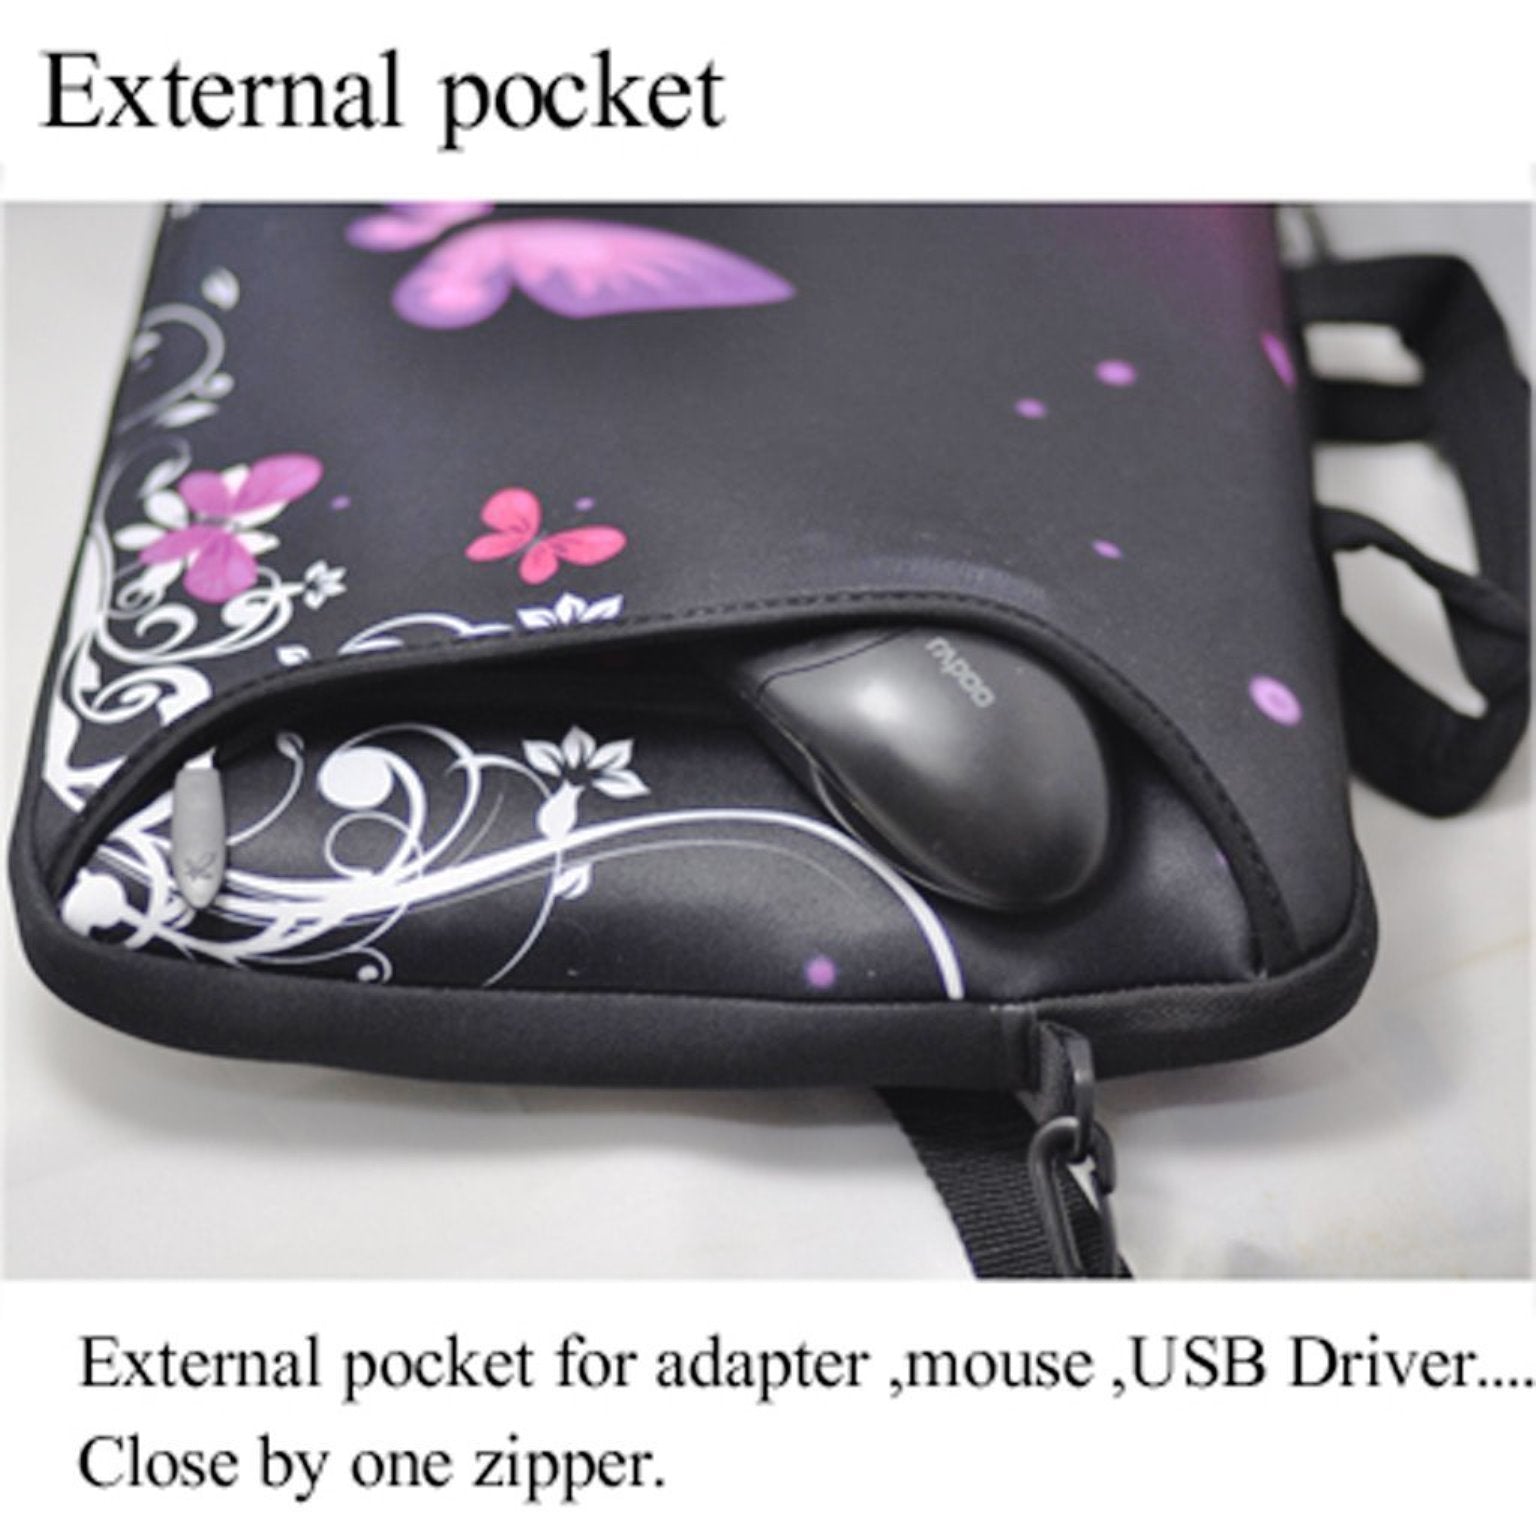 15"- 15.6" (inch) LAPTOP BAG CARRY CASE/BAG WITH HANDLE & STRAP NEOPRENE FOR LAPTOPS/NOTEBOOKS, *Purple Car*